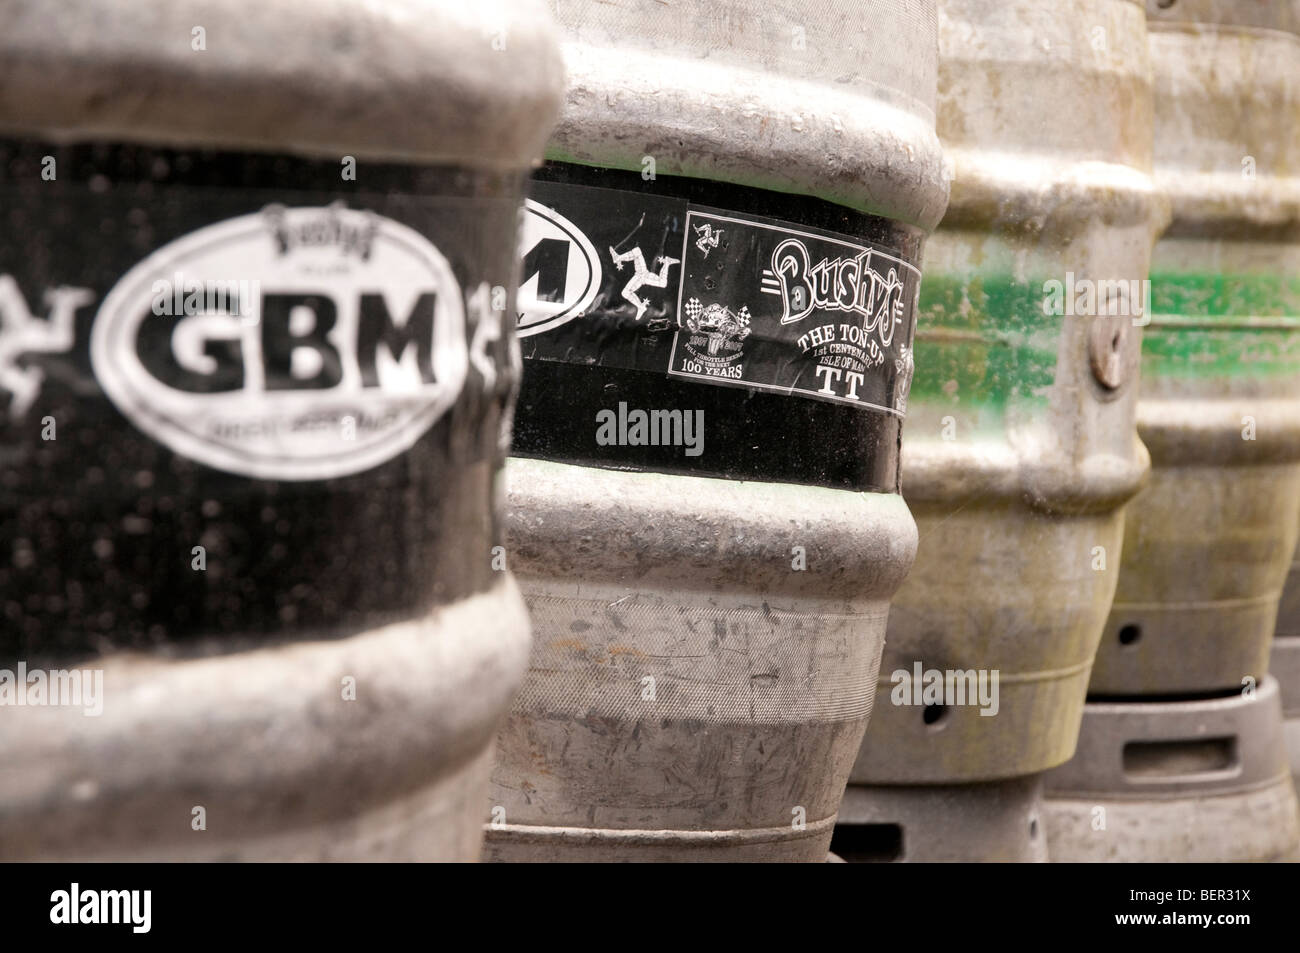 Line of Bushy's brewery casks outside the brewery in the isle of man, with branding and brewery name visible. Stock Photo